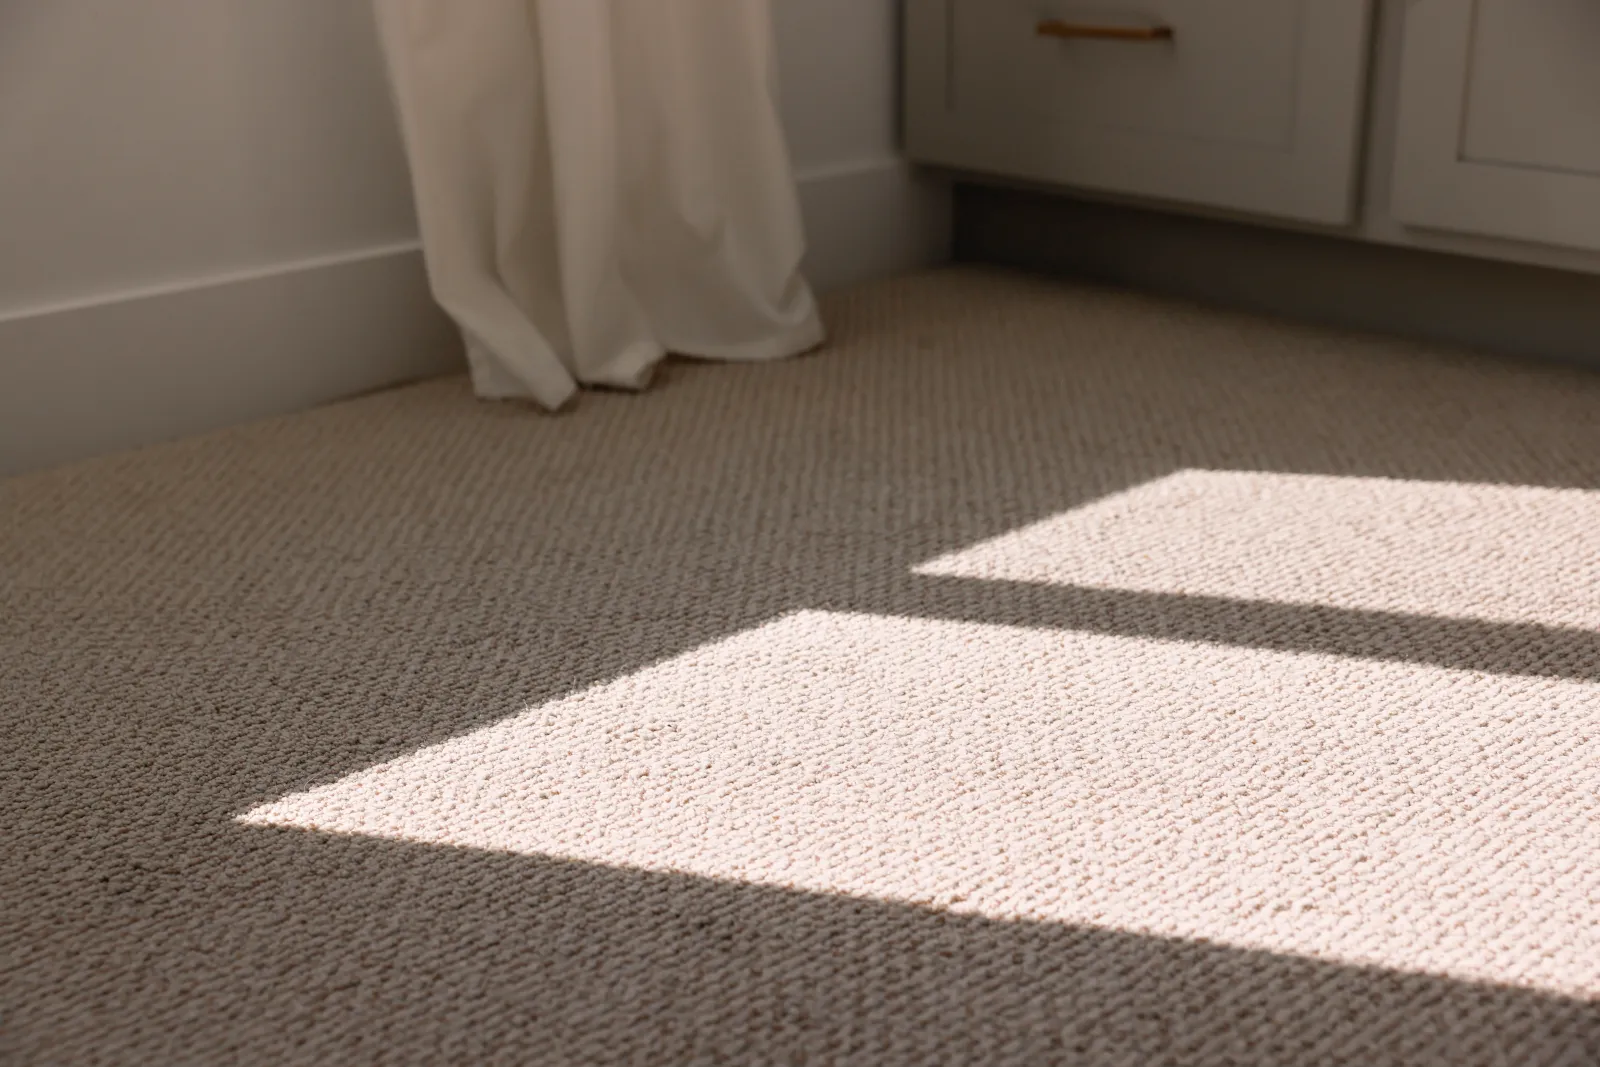 Picture of sunlight hitting on a carpet emphasizing how too much sunlight can cause yellowing of carpets due to photooxidation